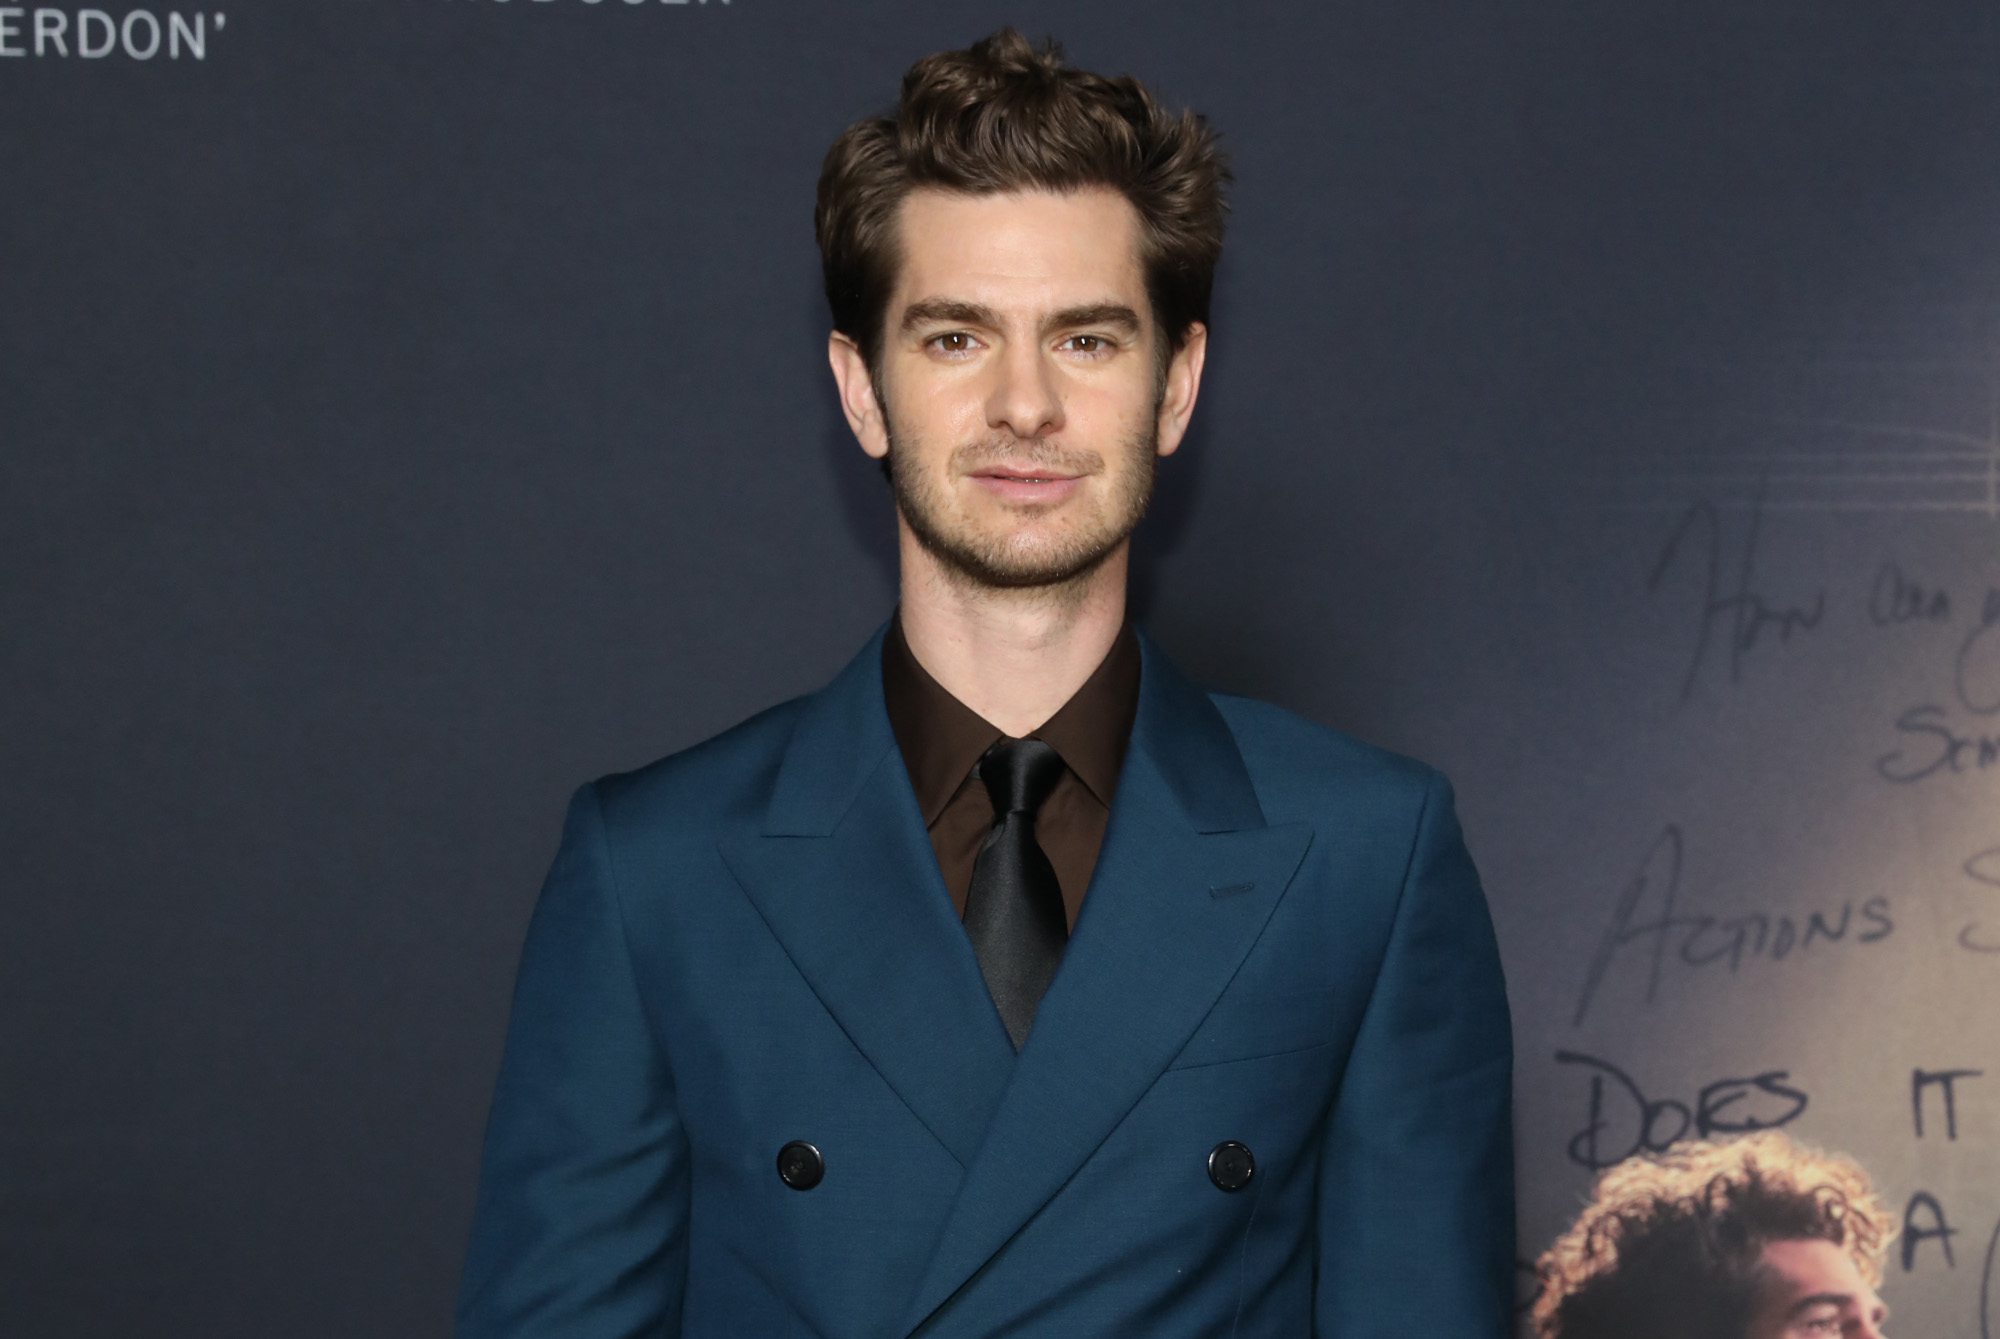 'Spider-Man: No Way Home' star Andrew Garfield wearing a blue suit and looking straight at the camera.